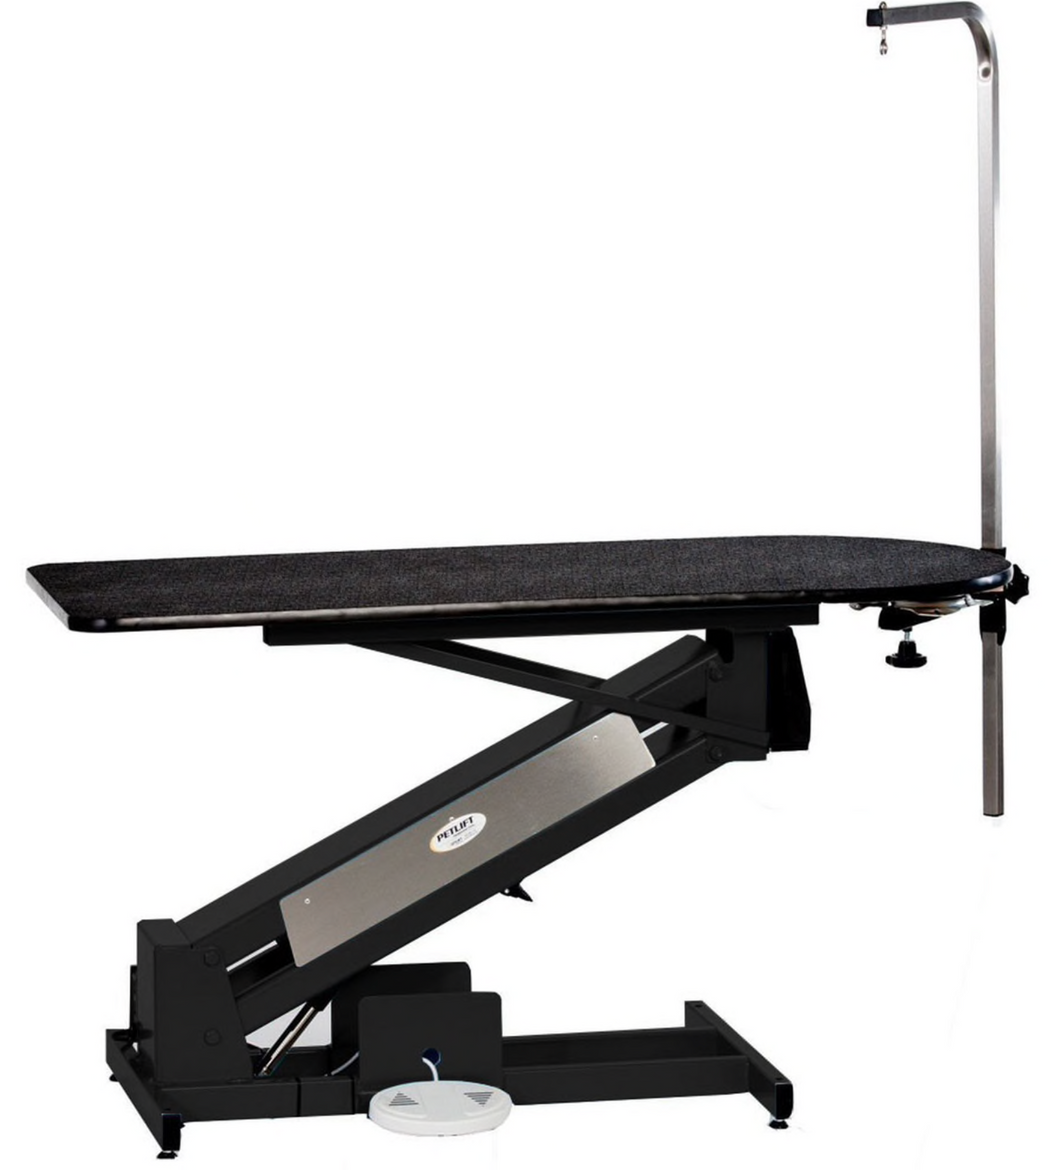 PetLift Masterlift LowRider Electric Table with Rotating Post